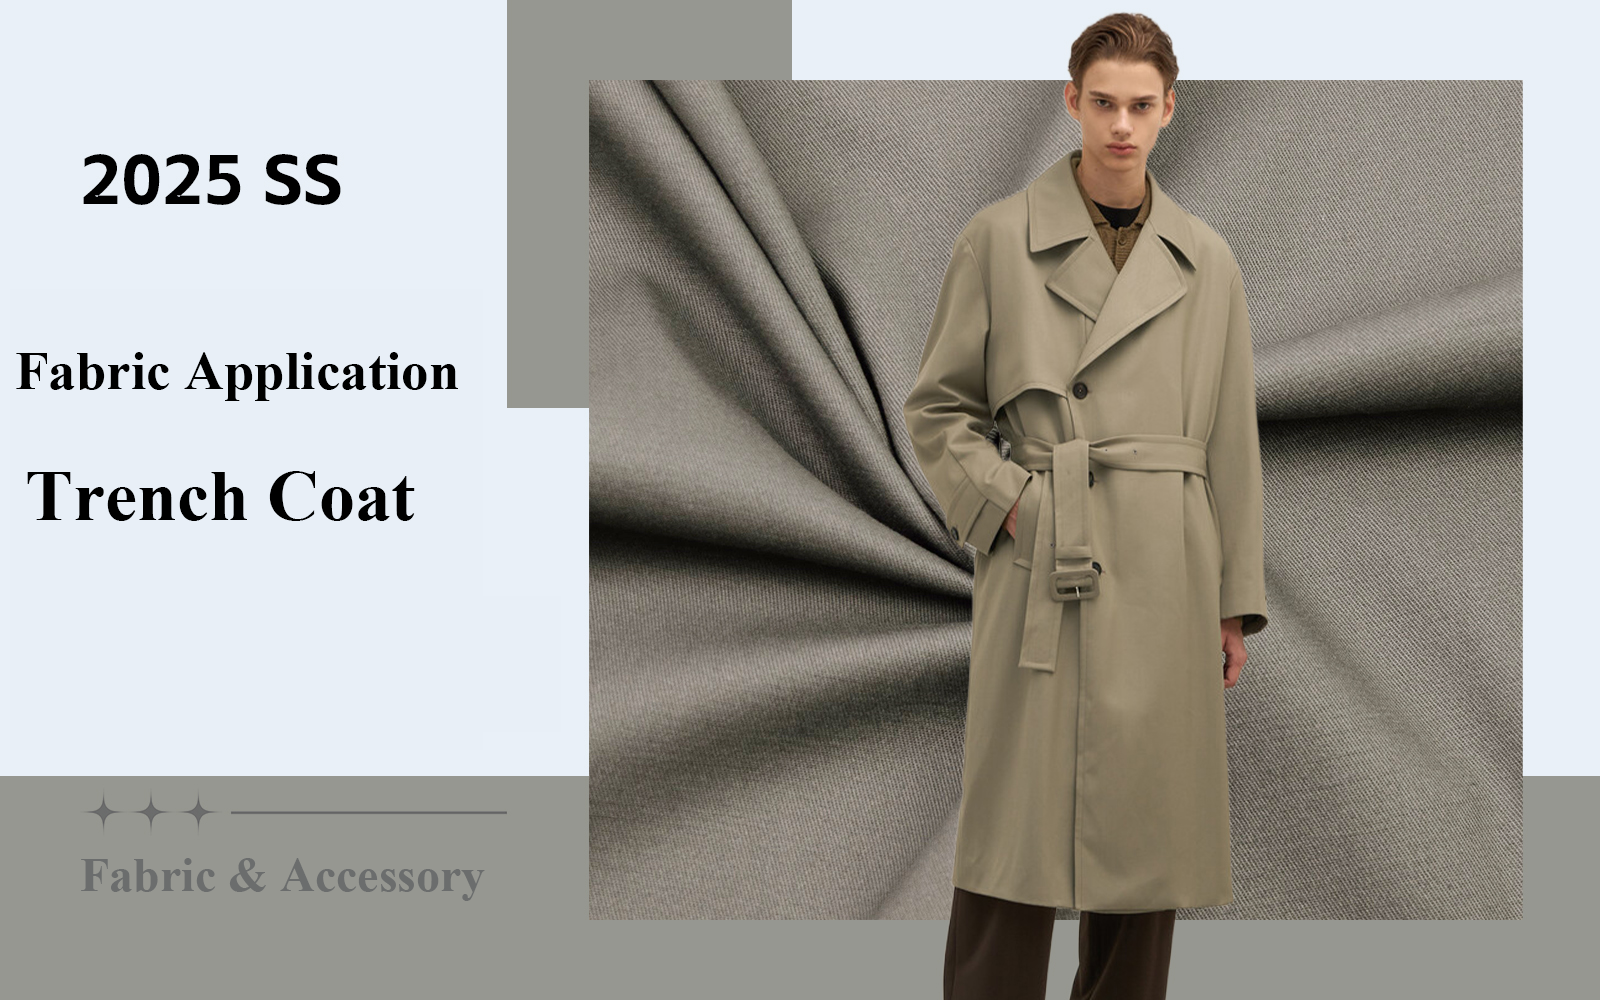 The Fabric Trend for Men's Trench Coat